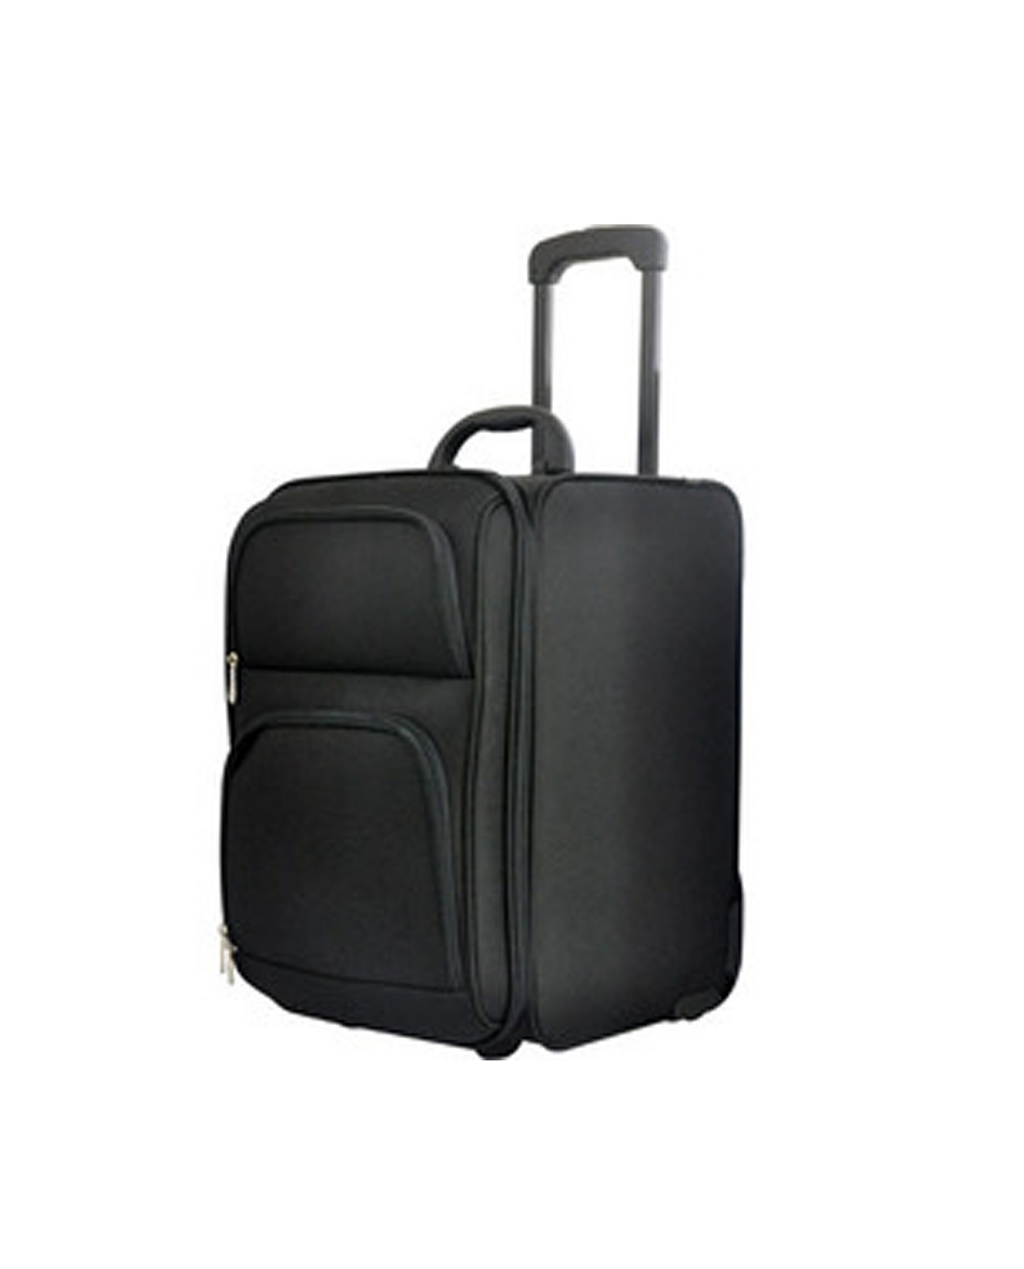 Carrying Case Model TB-81A for StagePro/StageMan